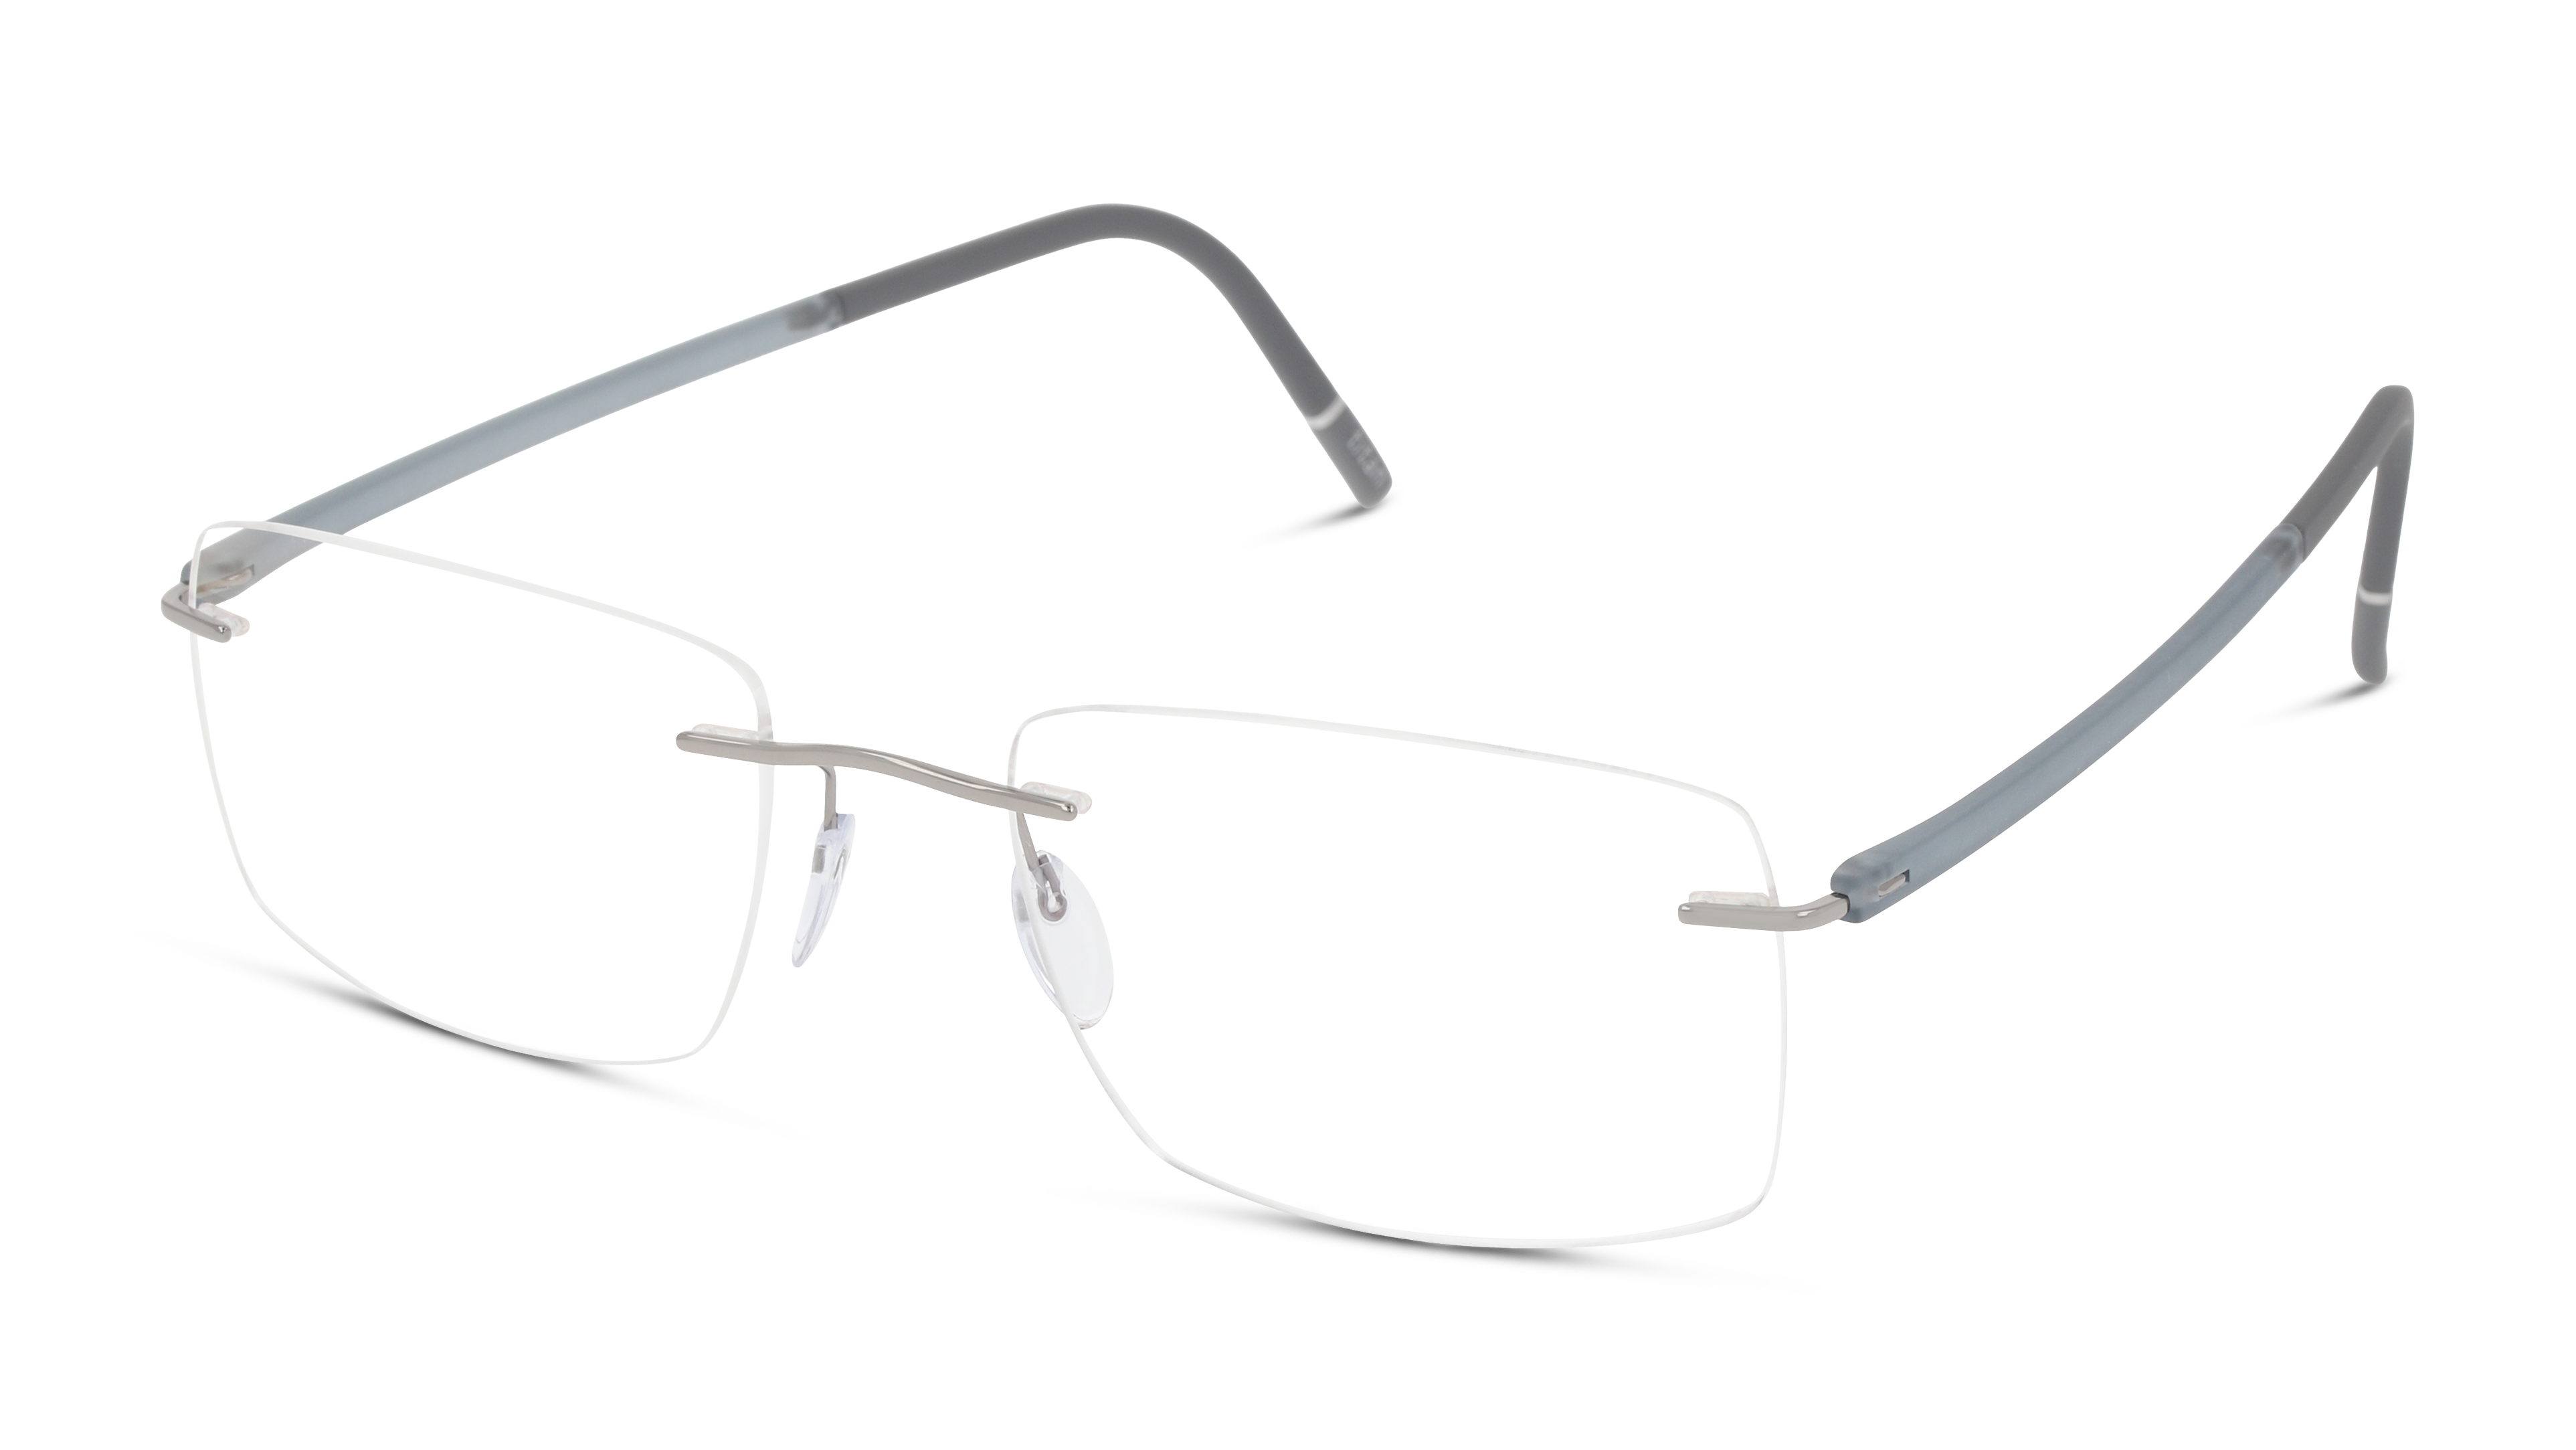 Angle_Left01 Silhouette 5567 (7310) Glasses Transparent / Silver